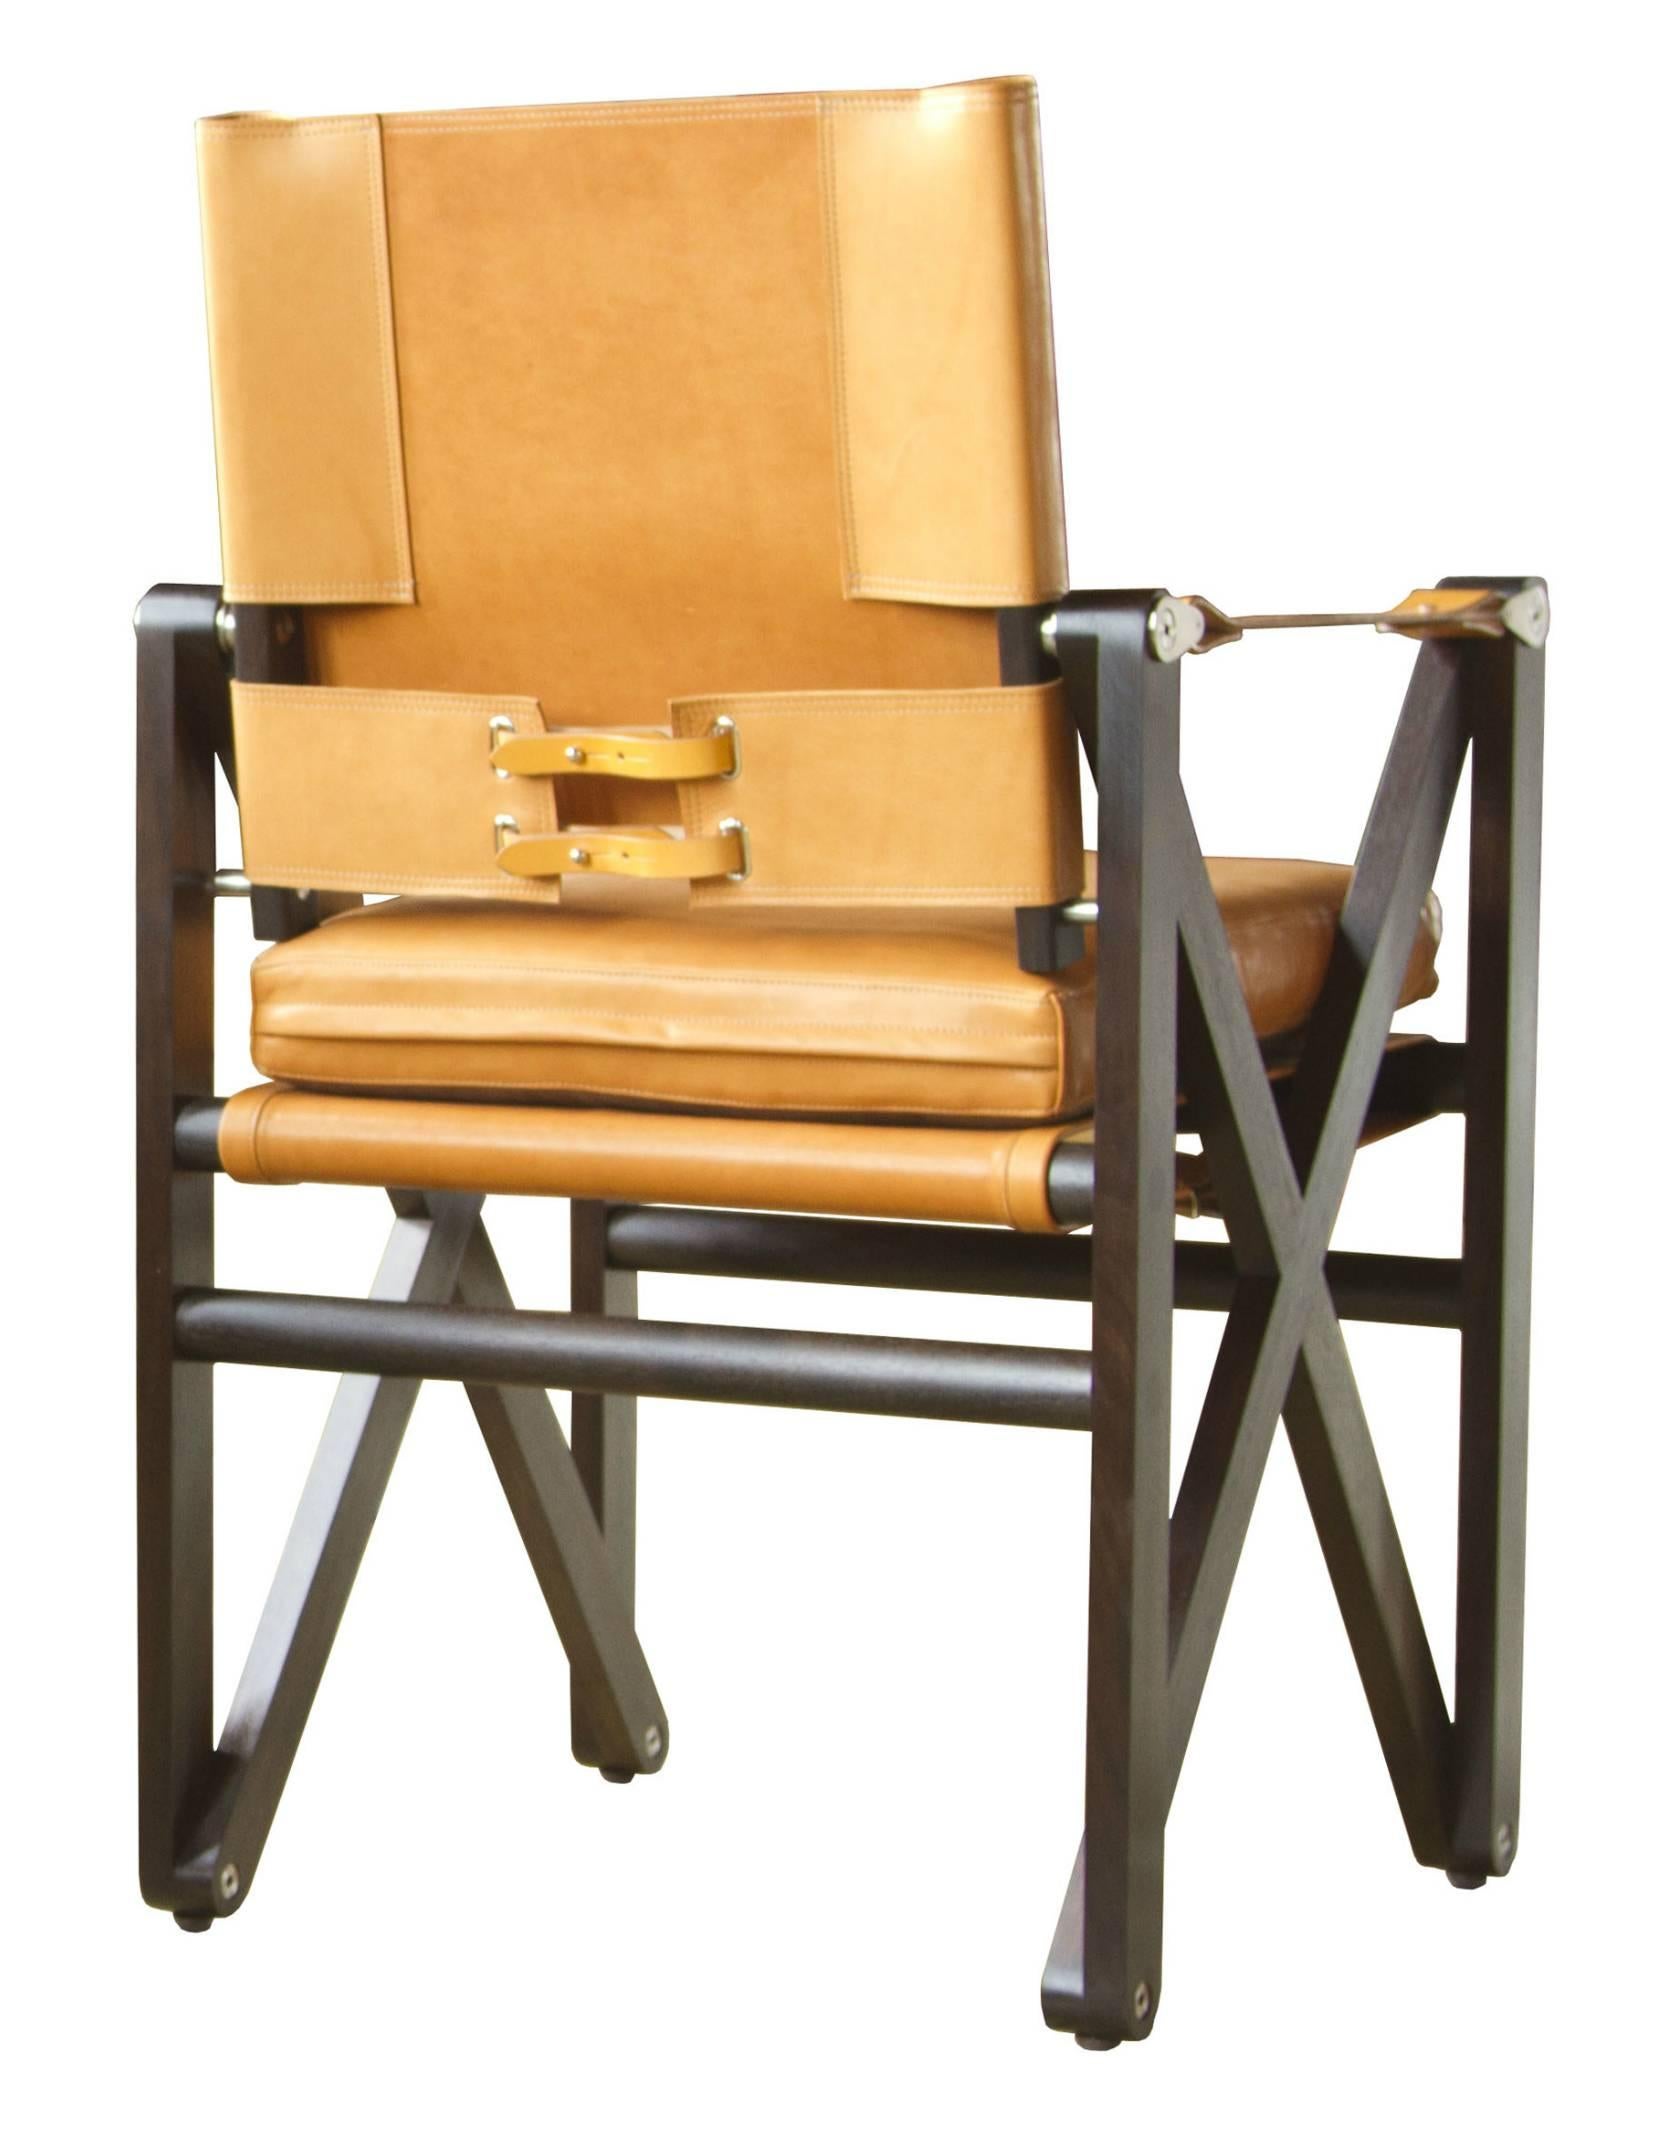 A MacLaren dining chair in Macassar stained walnut with Moore & Giles: Valhalla / Tan leather upholstery and coach English bridle leather straps.

The modern campaign collection by Richard Wrightman combines the vernacular of traditional form with a